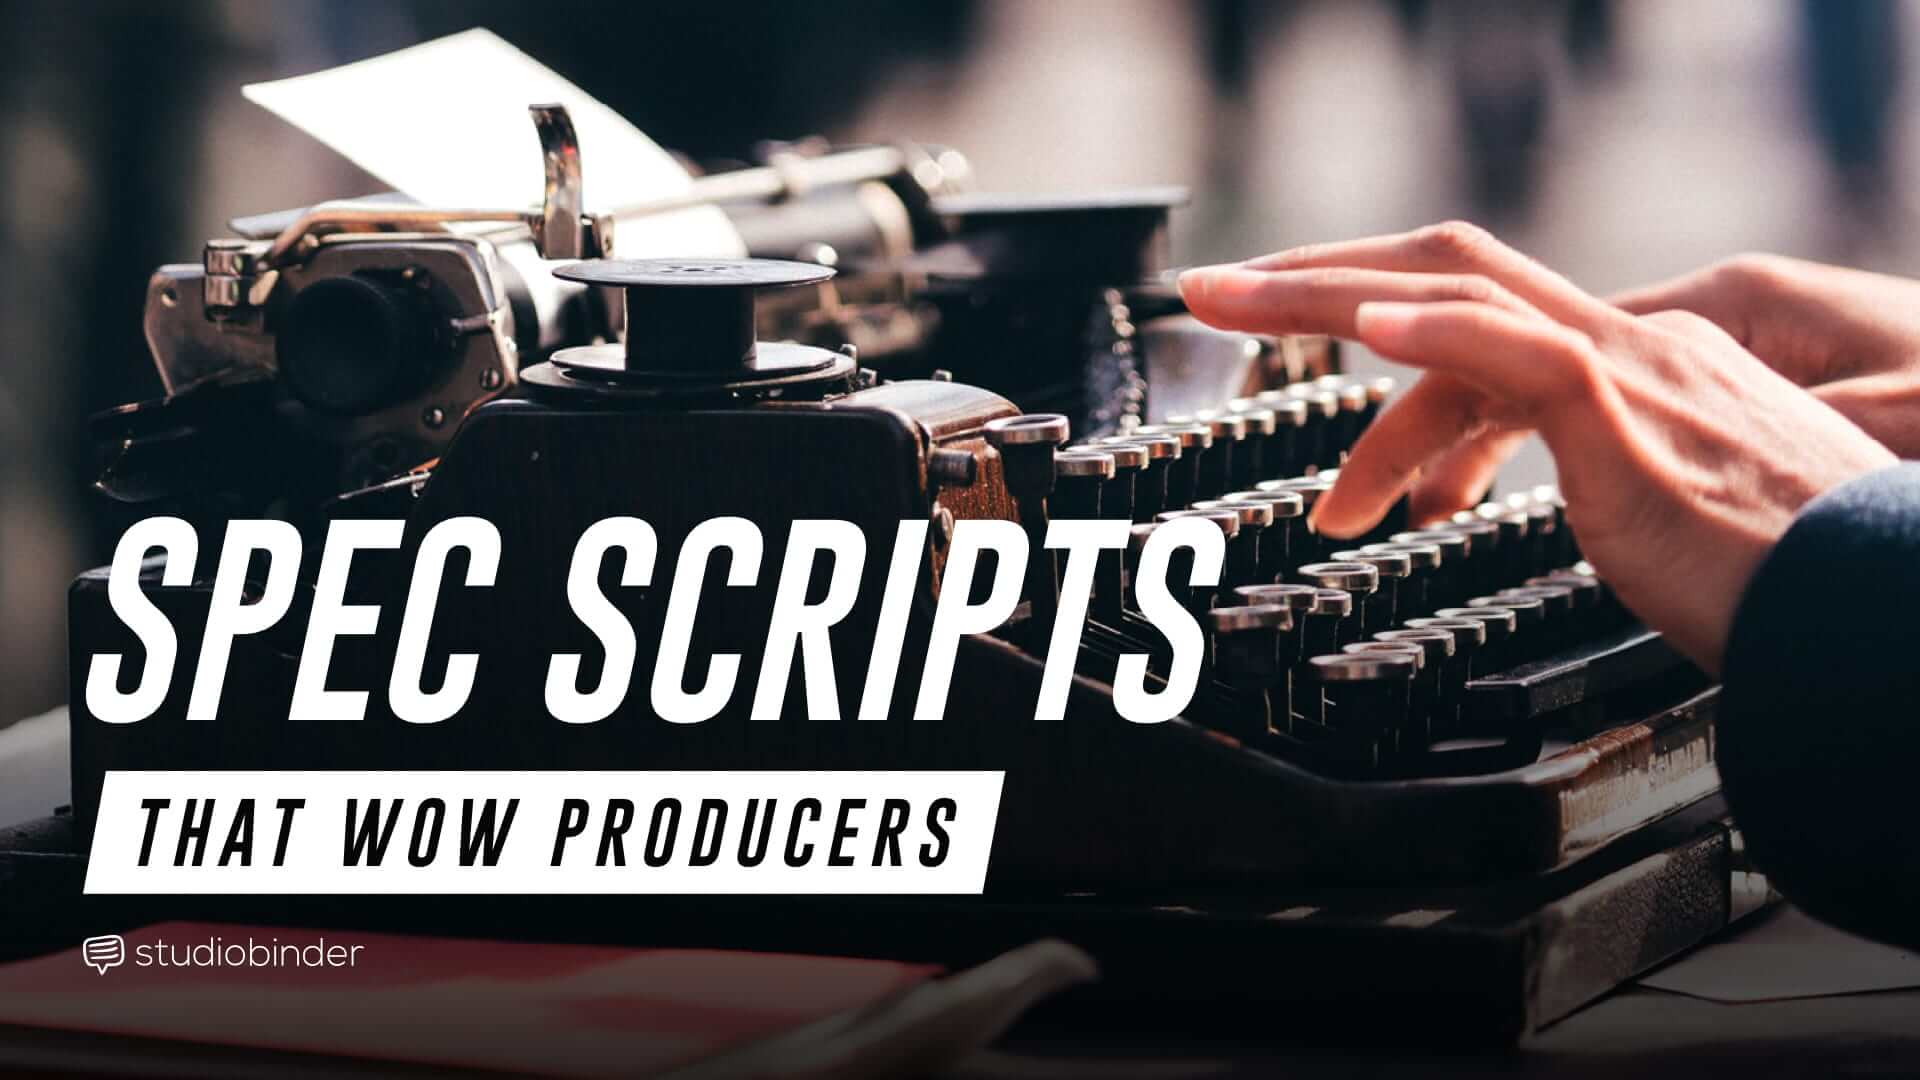 How To Write A Spec Script The Complete Guide To Writing On Spec